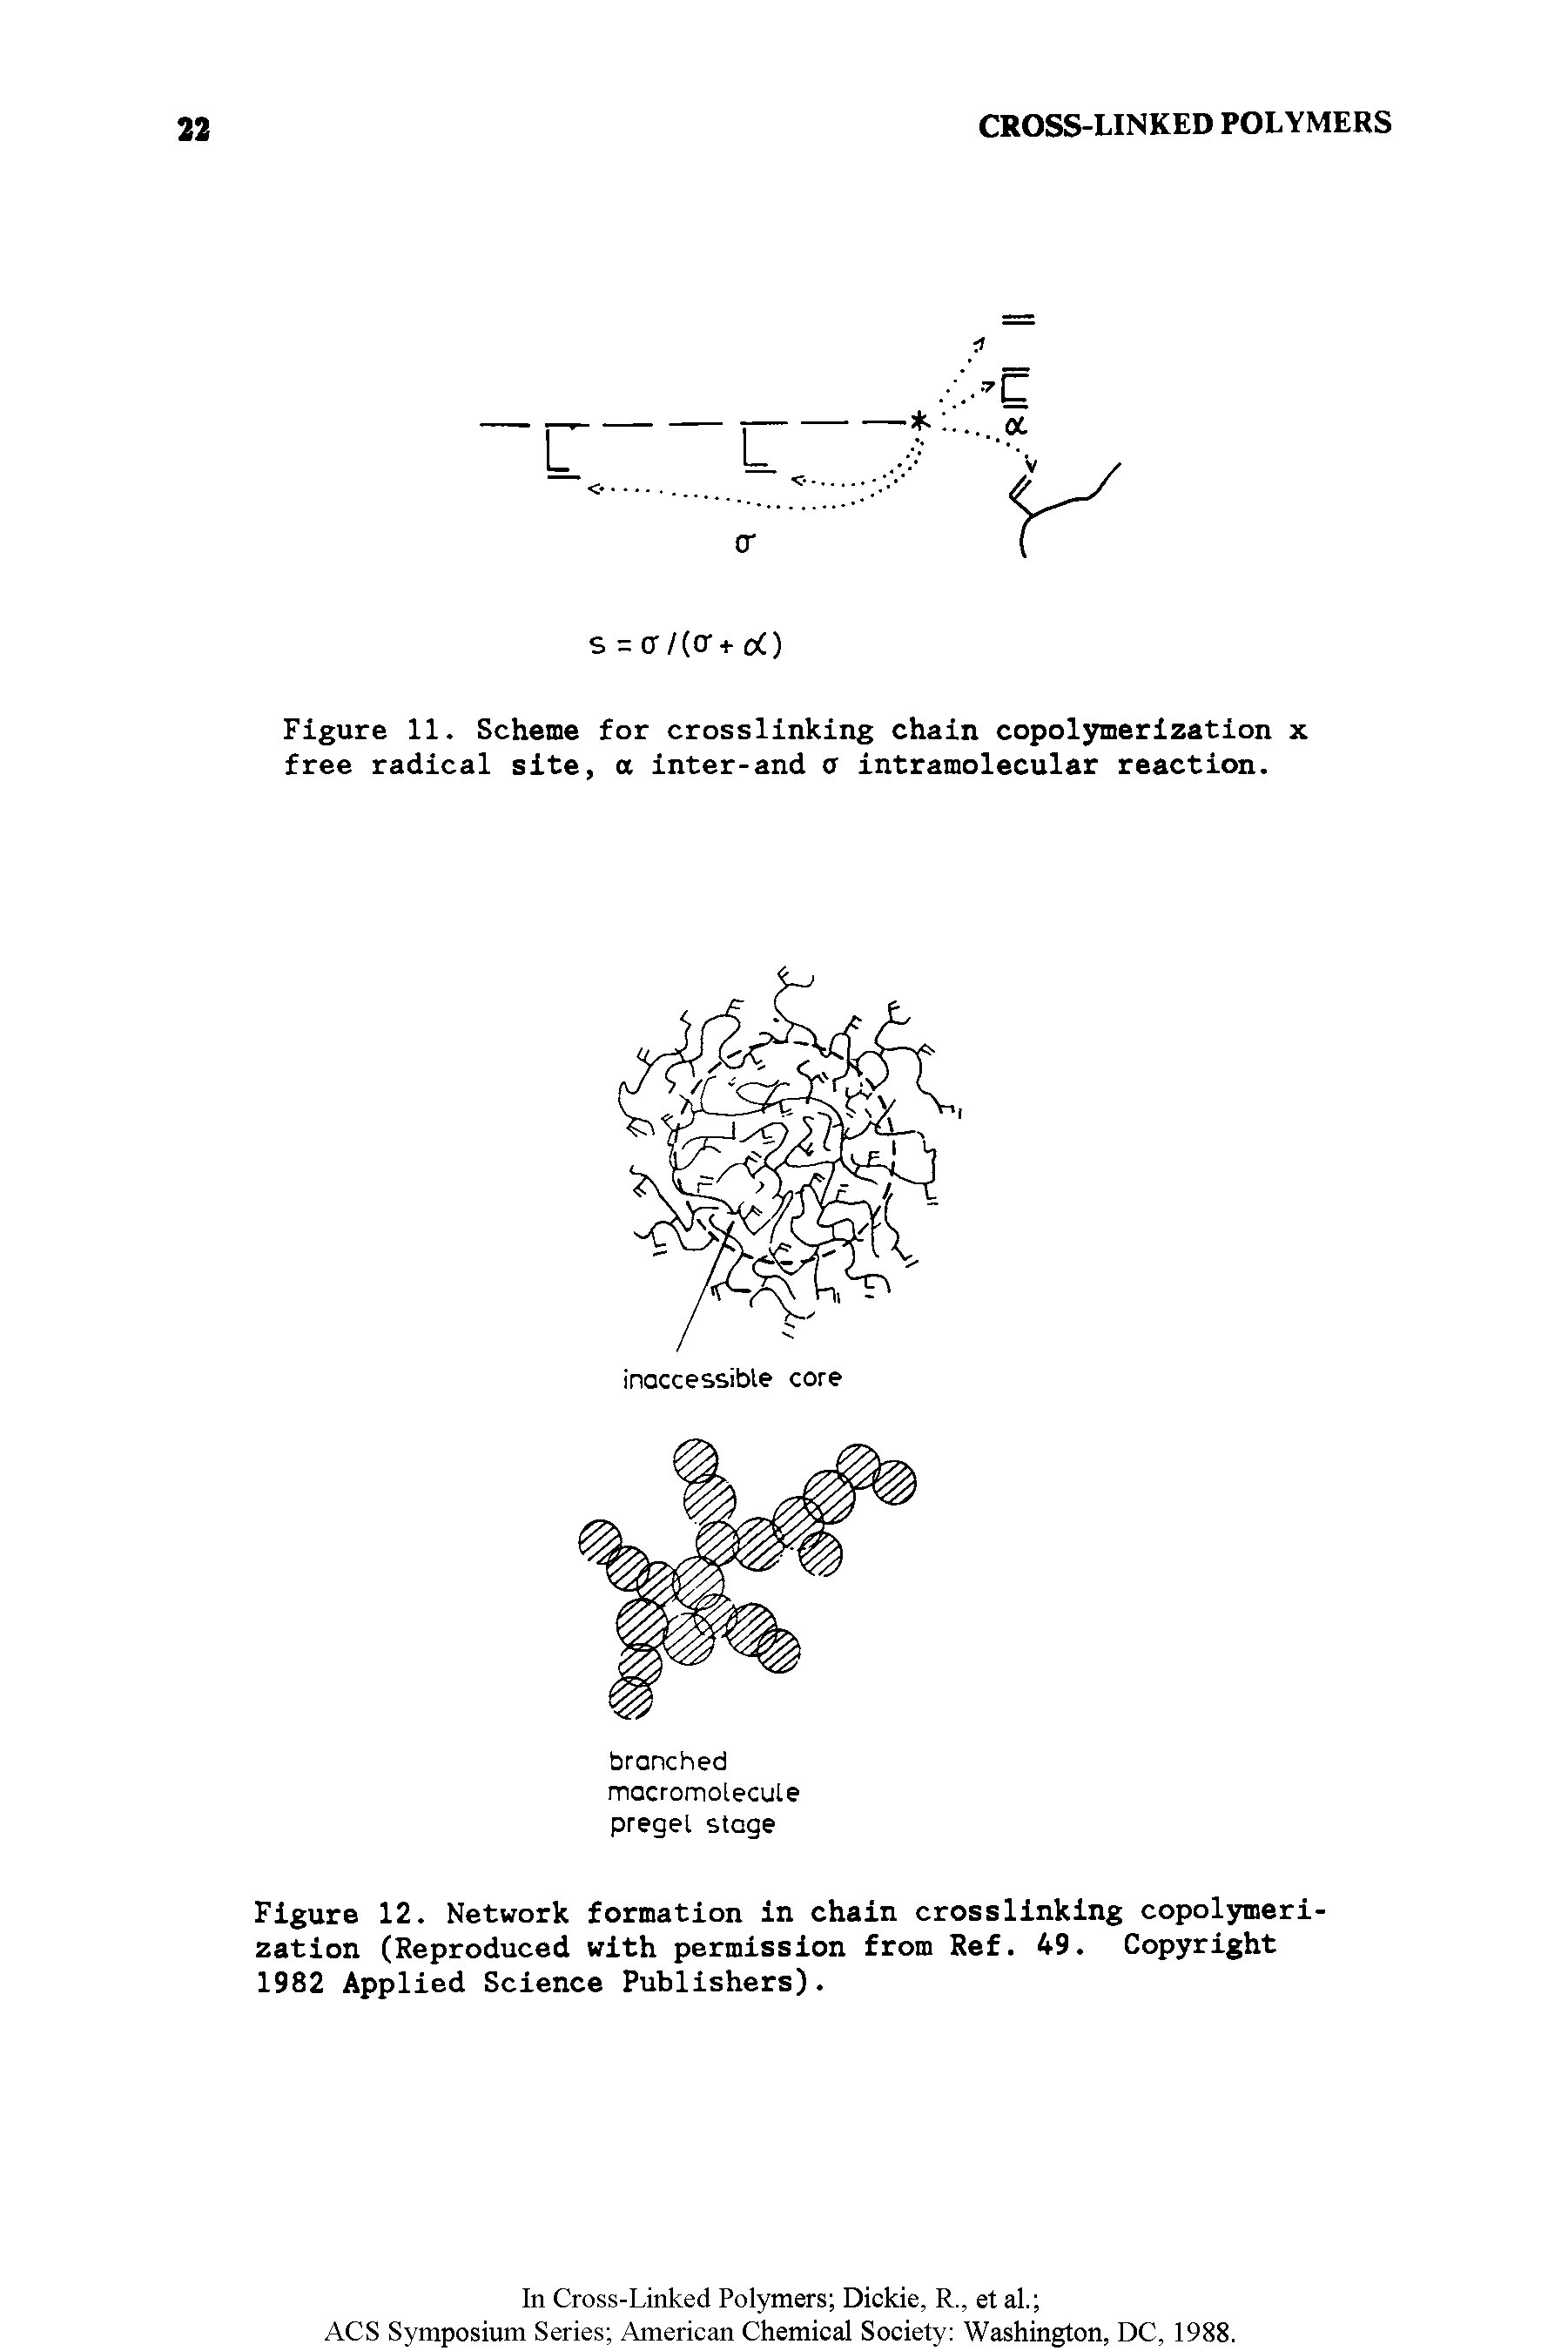 Figure 12. Network formation in chain crosslinking copolymerization (Reproduced with permission from Ref. 49. Copyright 1982 Applied Science Publishers).